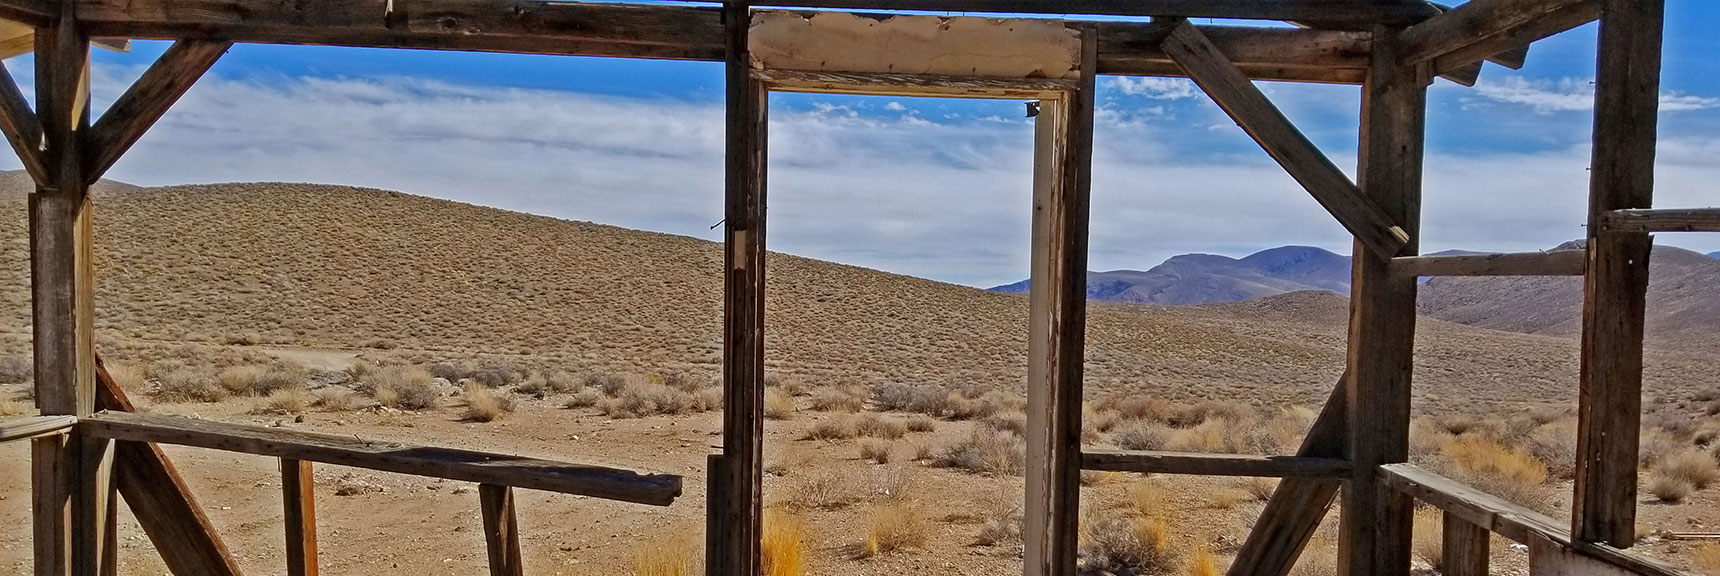 View Out the Front Door of the Mining Cabin | Skidoo Stamp Mill, Panamint Mountains, Death Valley National Park, CA